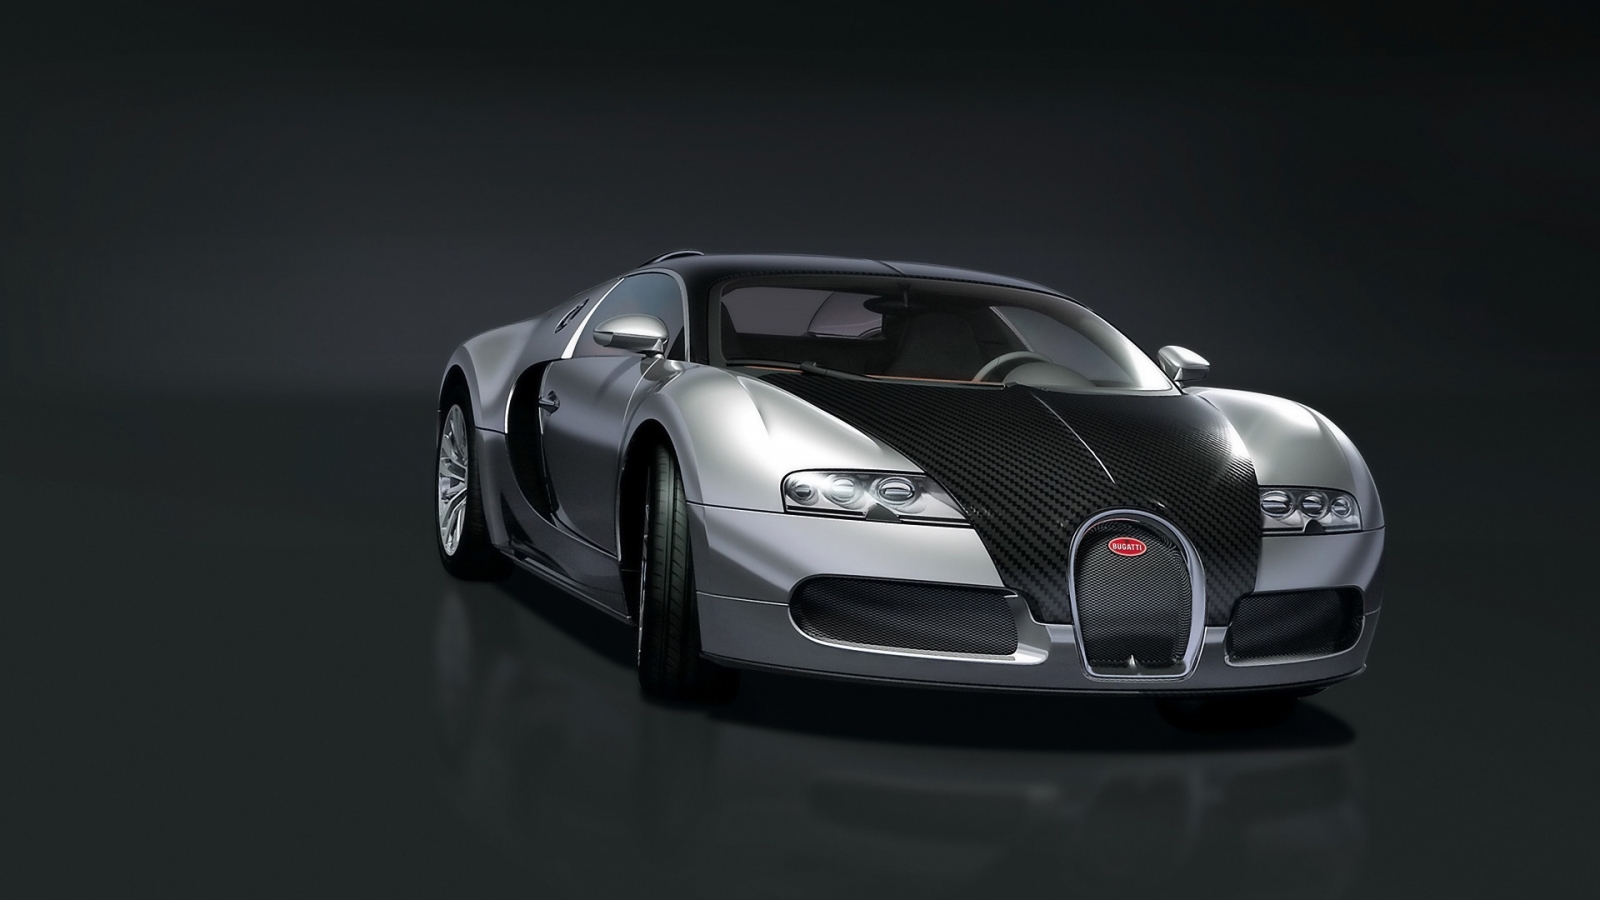 Bugatti EB 16.4 Veyron Pur Sang 2008 - Front Angle for 1600 x 900 HDTV resolution